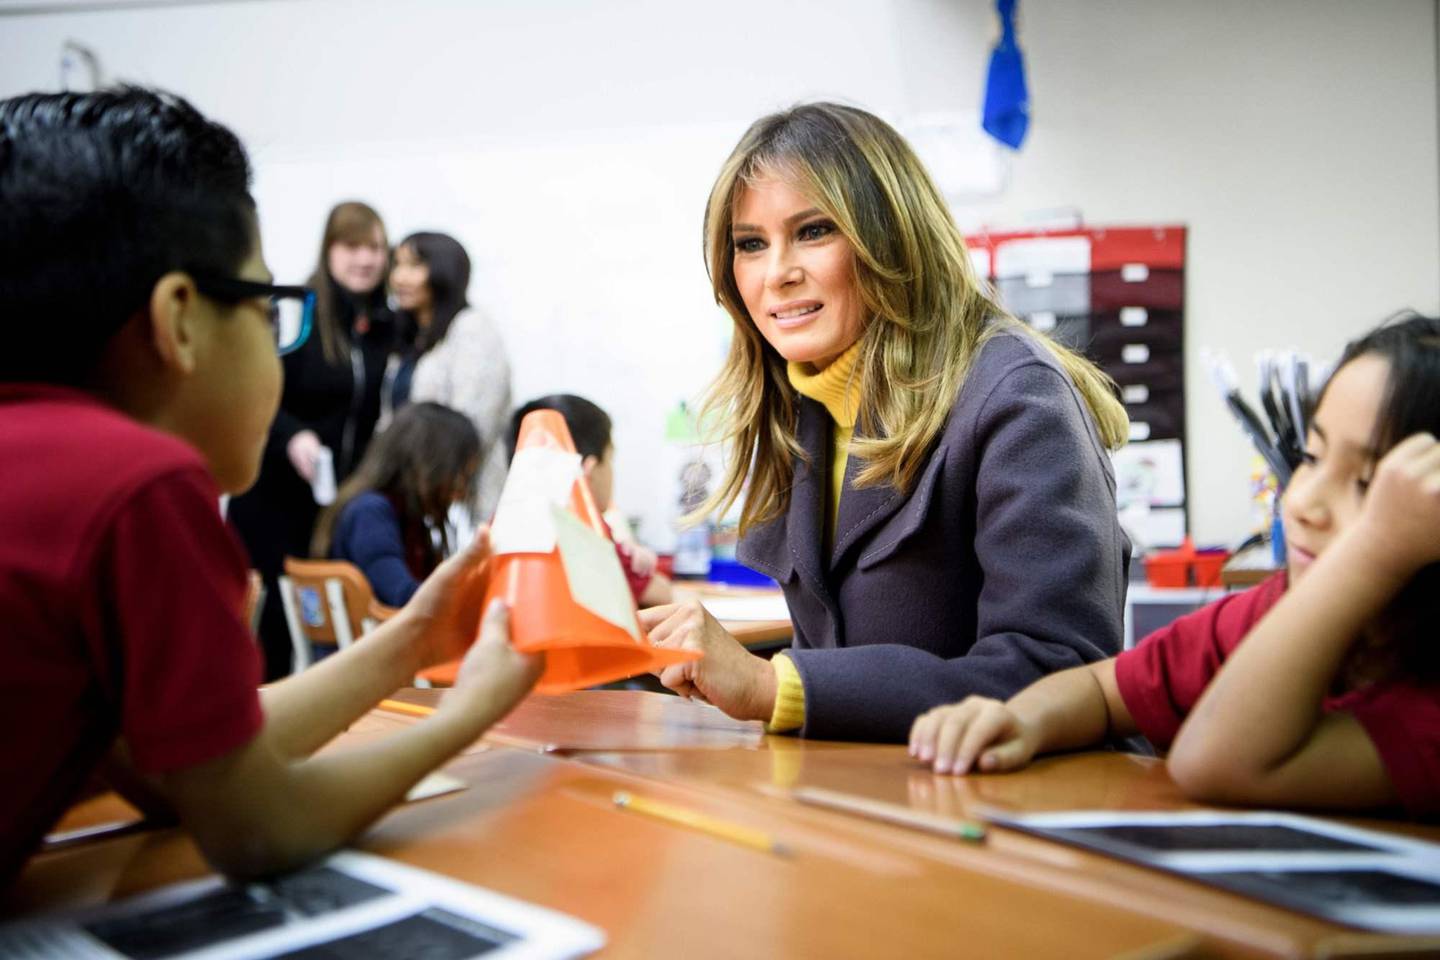 US First Lady Melania Trump visits a 2nd grade language arts class at the Dove School of Discovery on March 4, 2019 in Tulsa, Oklahoma. - The First Lady is travelling to Oklahoma, Washington, and Nevada as part of her "Be Best" tour. (Photo by Brendan Smialowski / AFP)